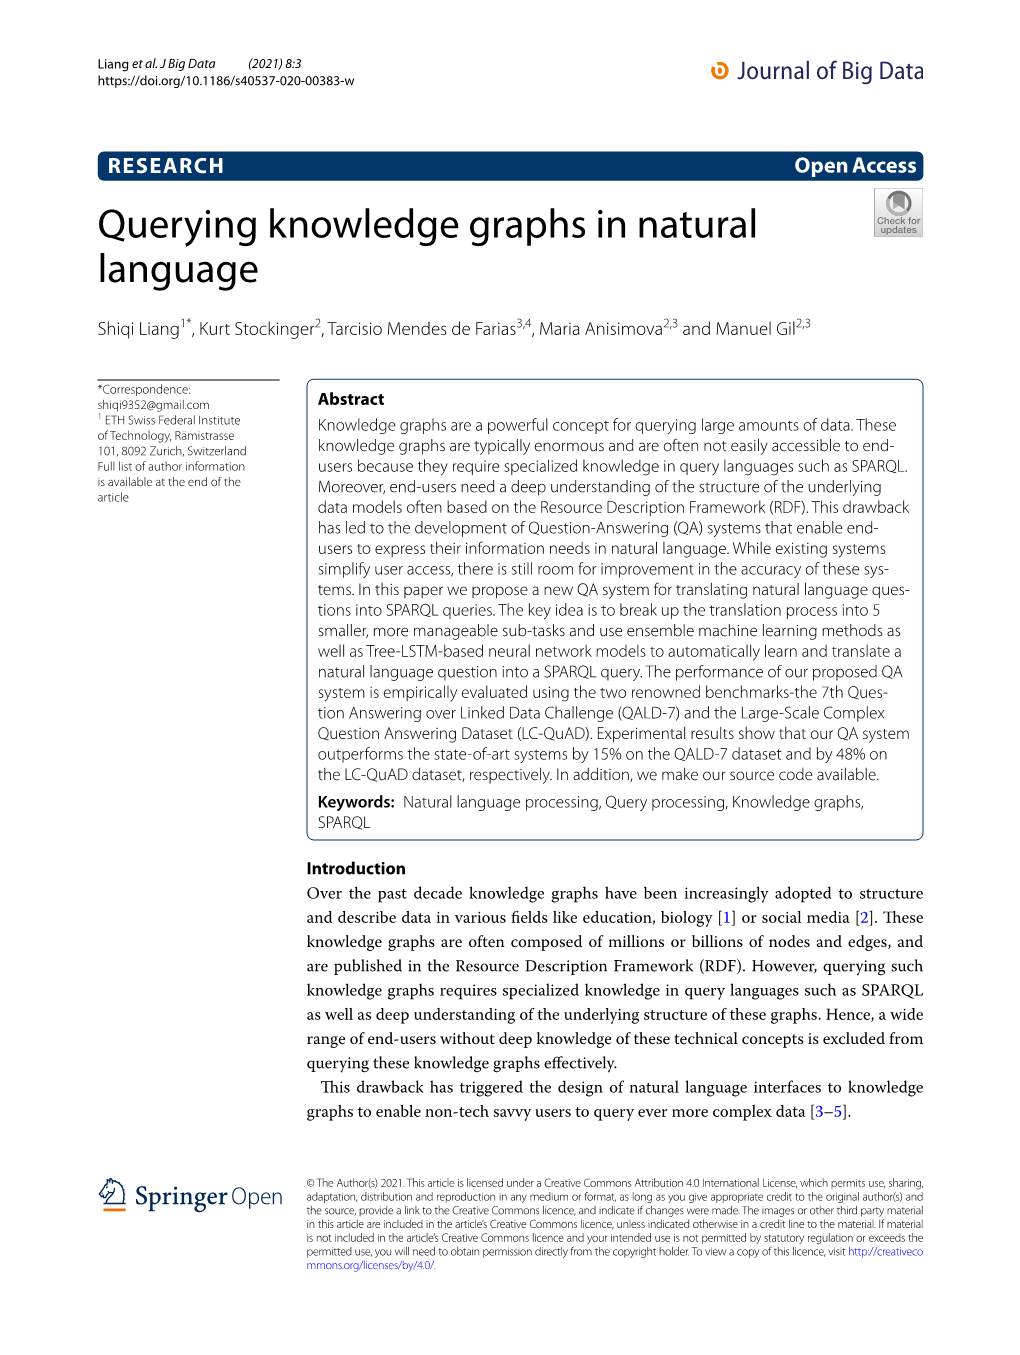 Querying Knowledge Graphs in Natural Language